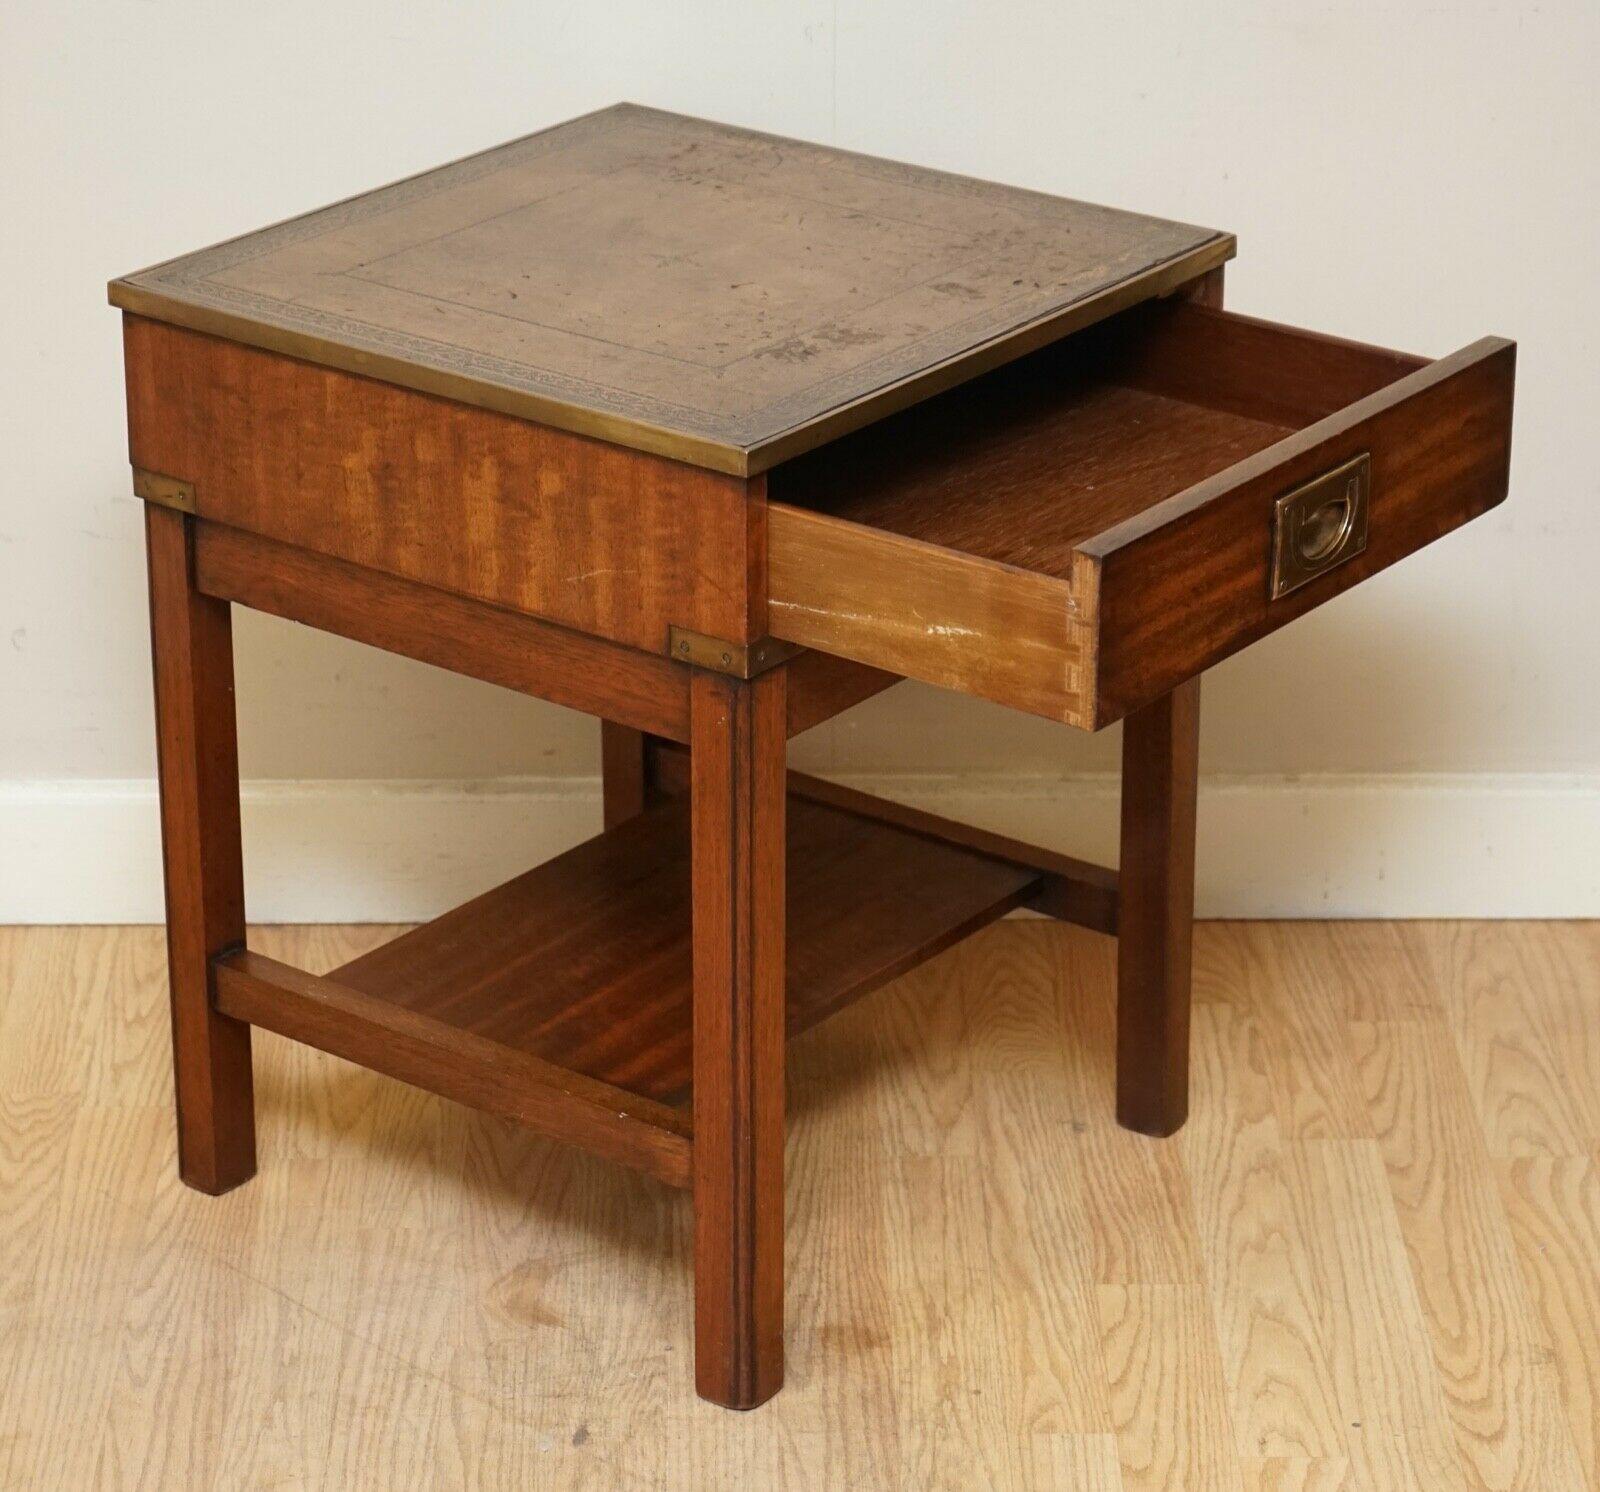 20th Century Pair of Vintage Military Campaign Bedside Tables with Brown Leather Top